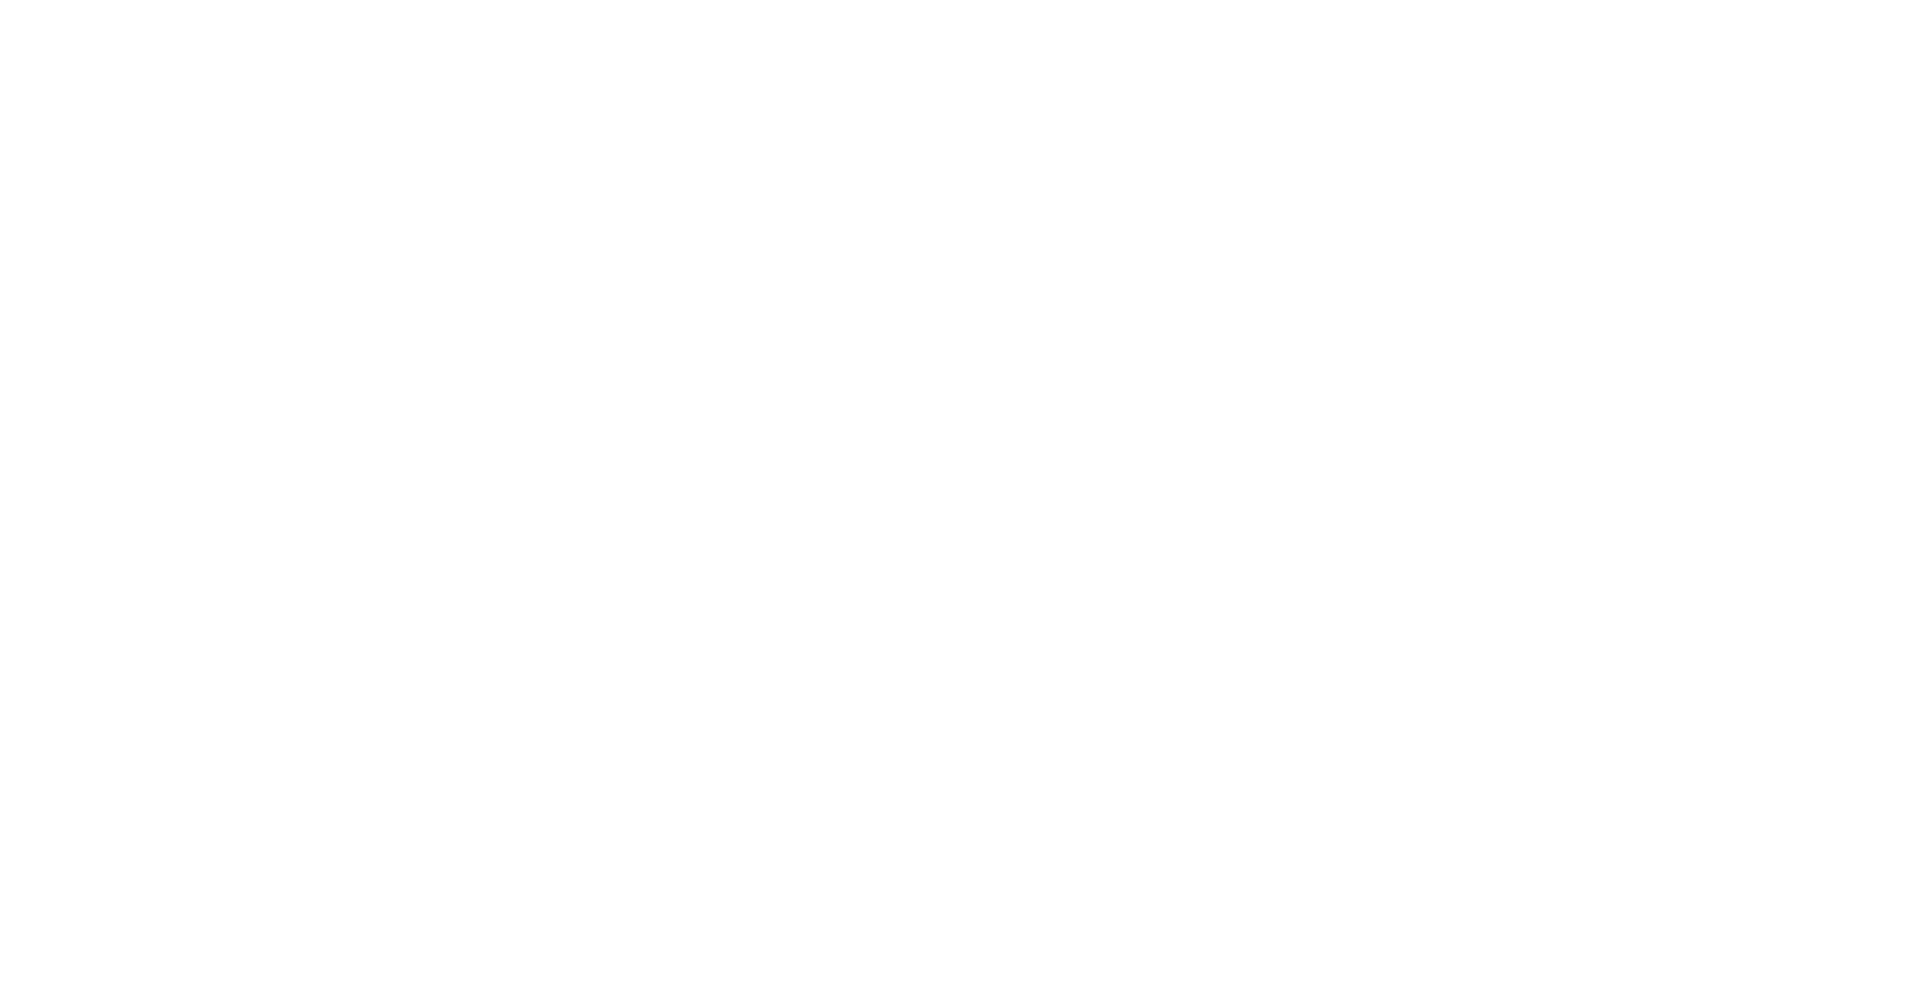 Caring Essentials offers Trauma Informed Programs for infant care